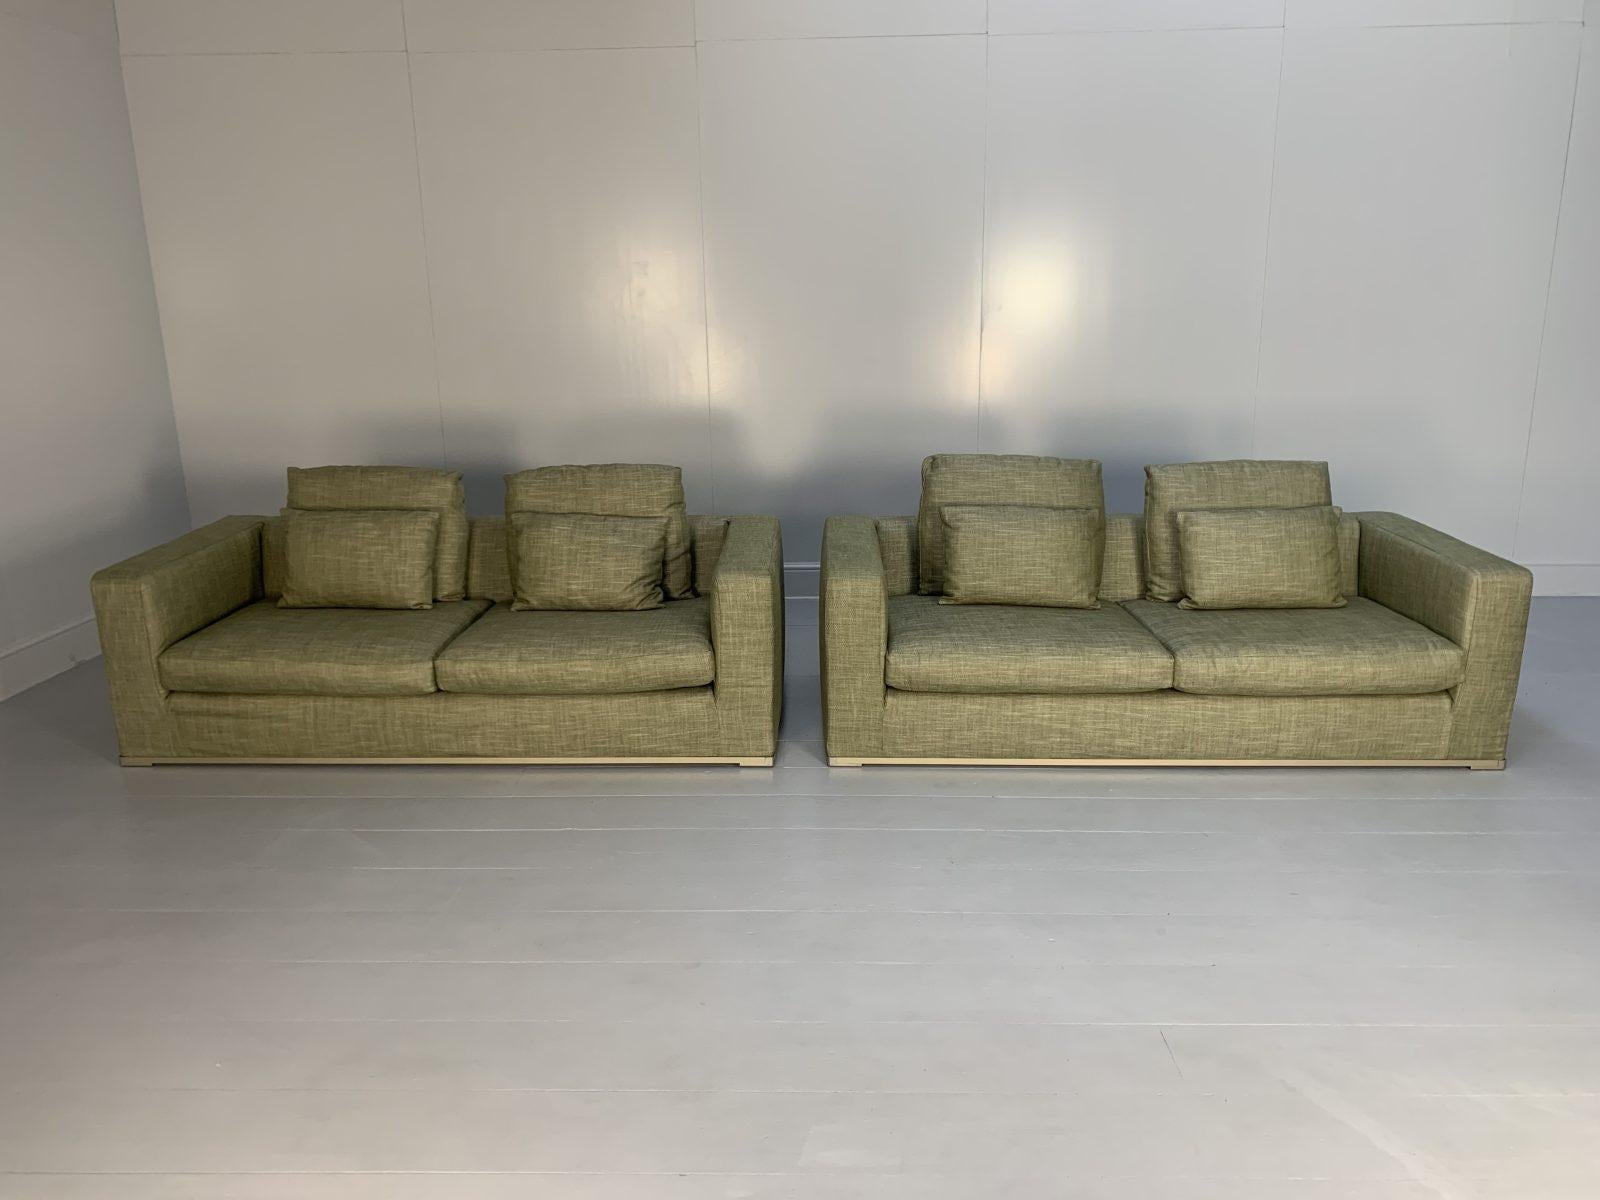 Pair of B&B Italia “Omnia” Sofas, 2.5-Seat, in Pale Green Linen For Sale 5